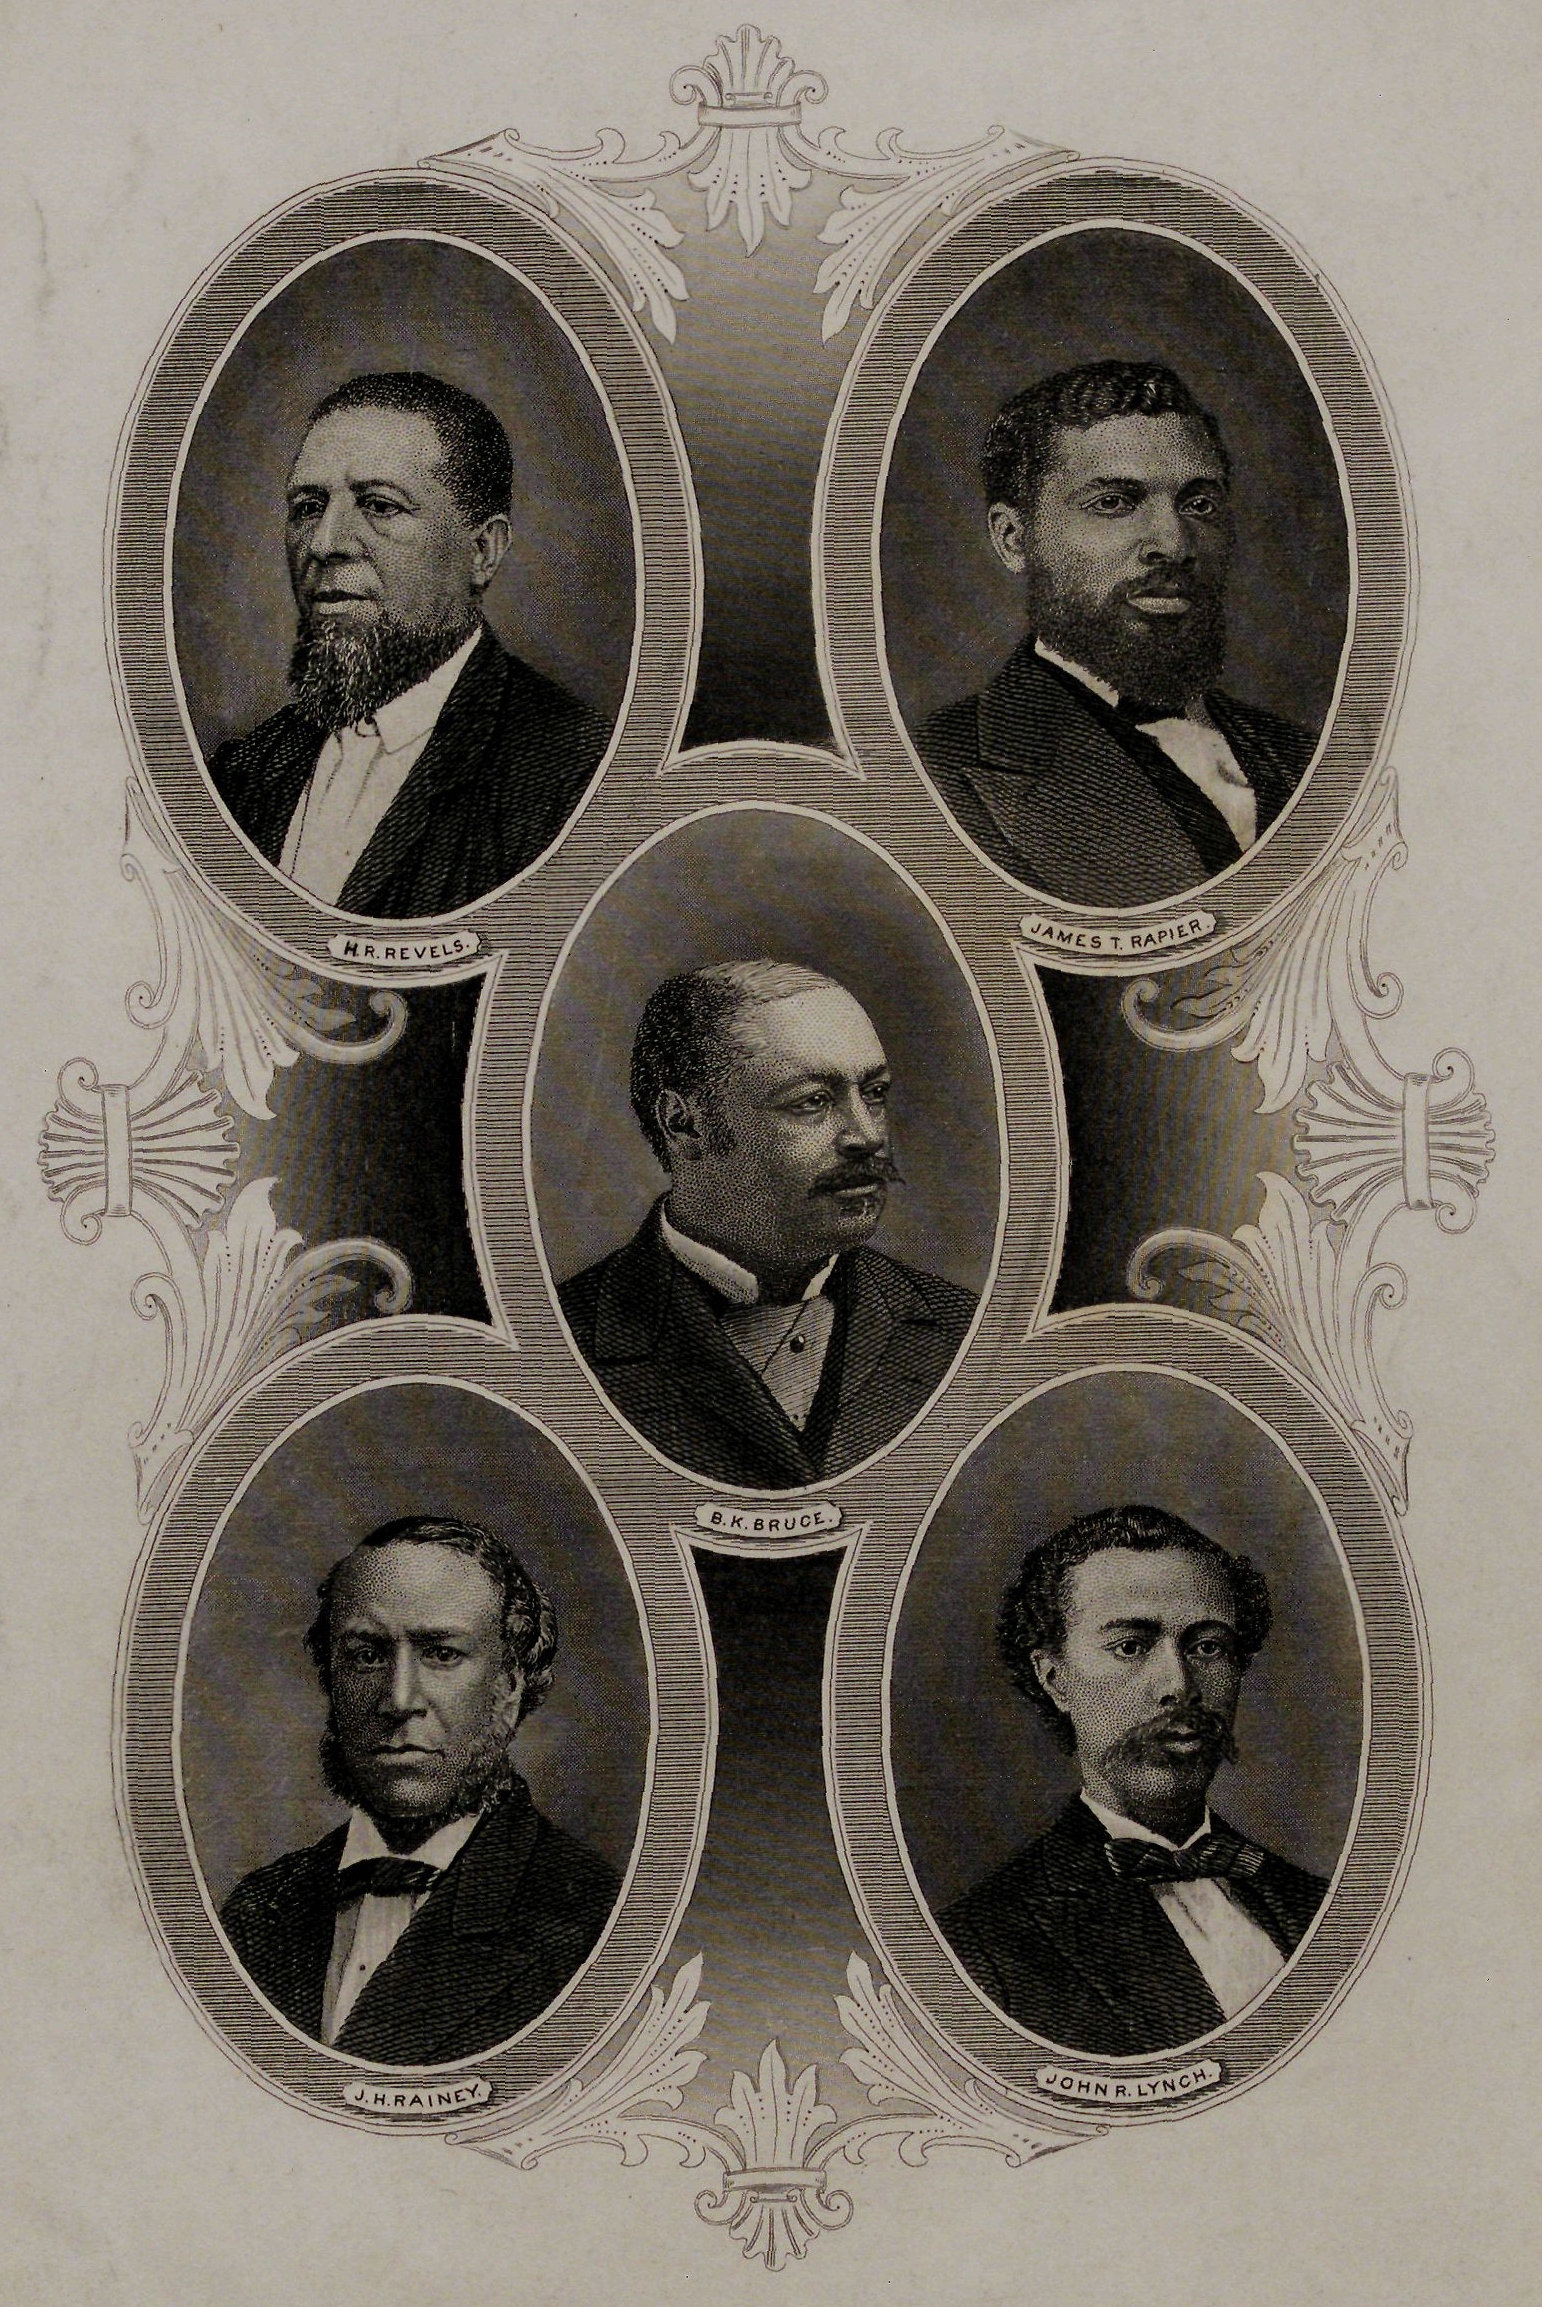 Engraved portrait of African American members of Reconstruction Congresses, Wellstood and Co., New York, ca. 1880s. (The Gilder Lehrman Institute of American History, GLC09400.447)